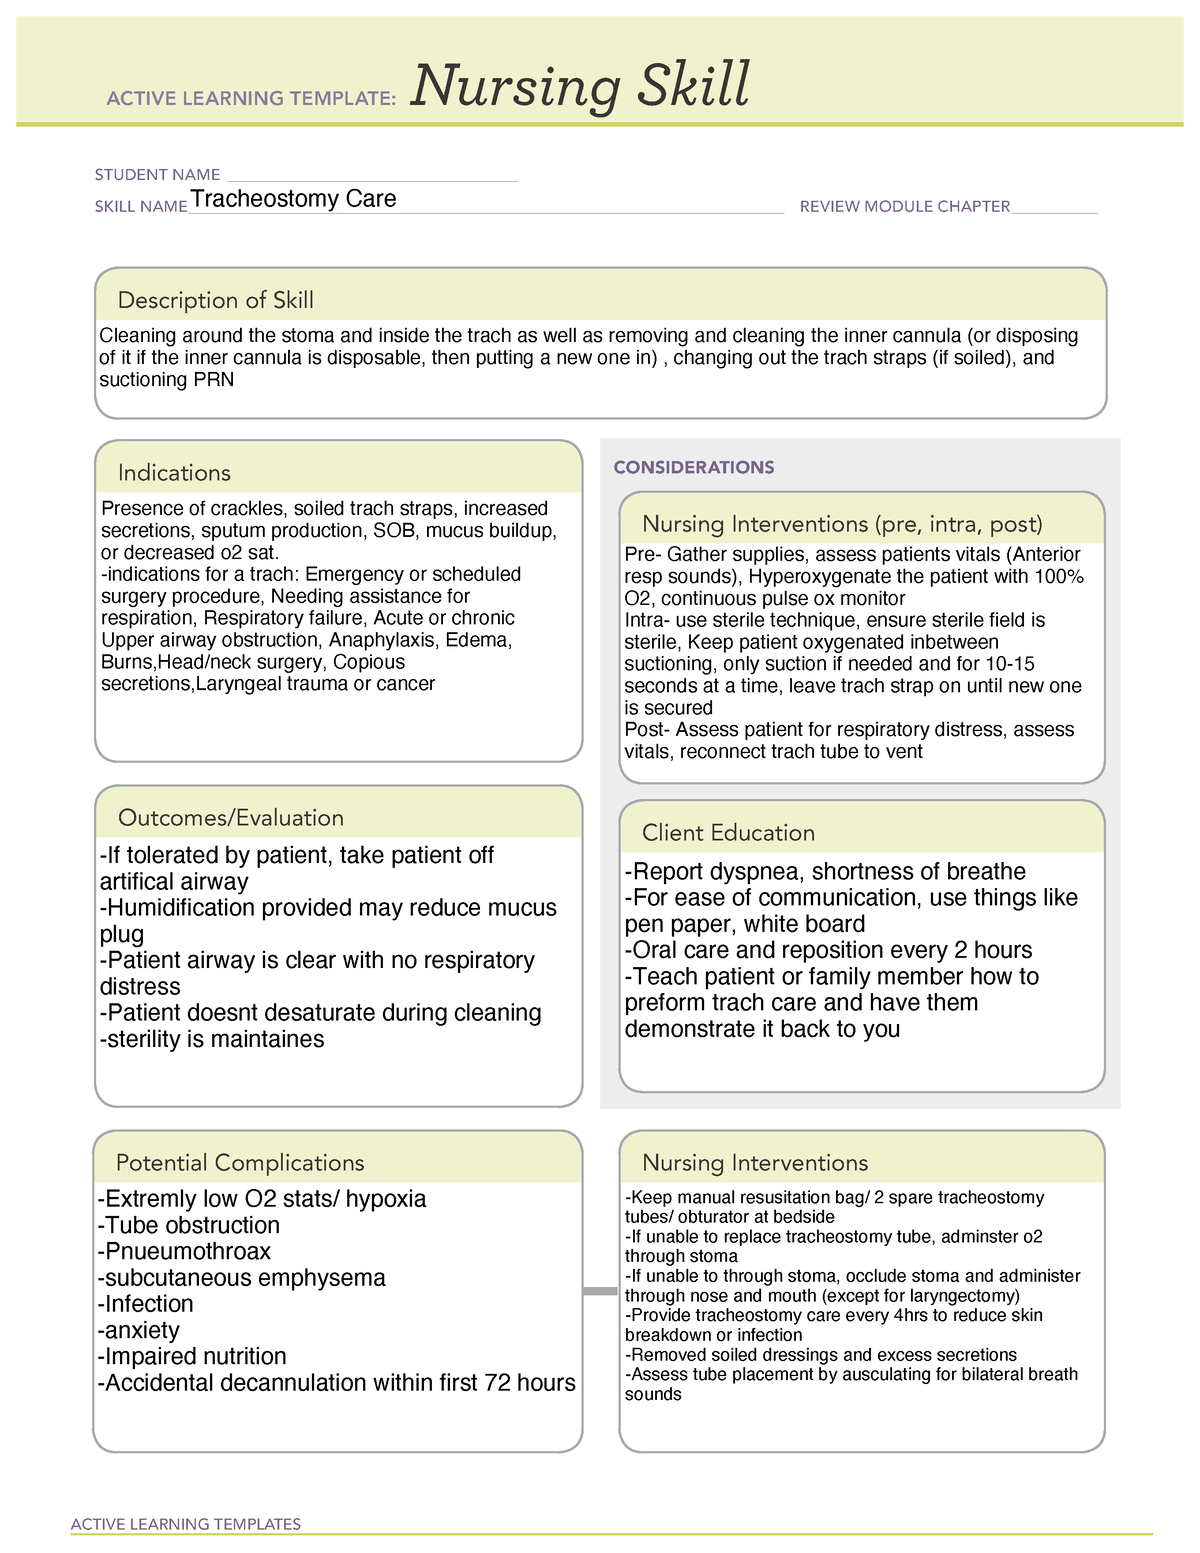 Trach Care ATI Template A ACTIVE LEARNING TEMPLATE: Nursing Skill